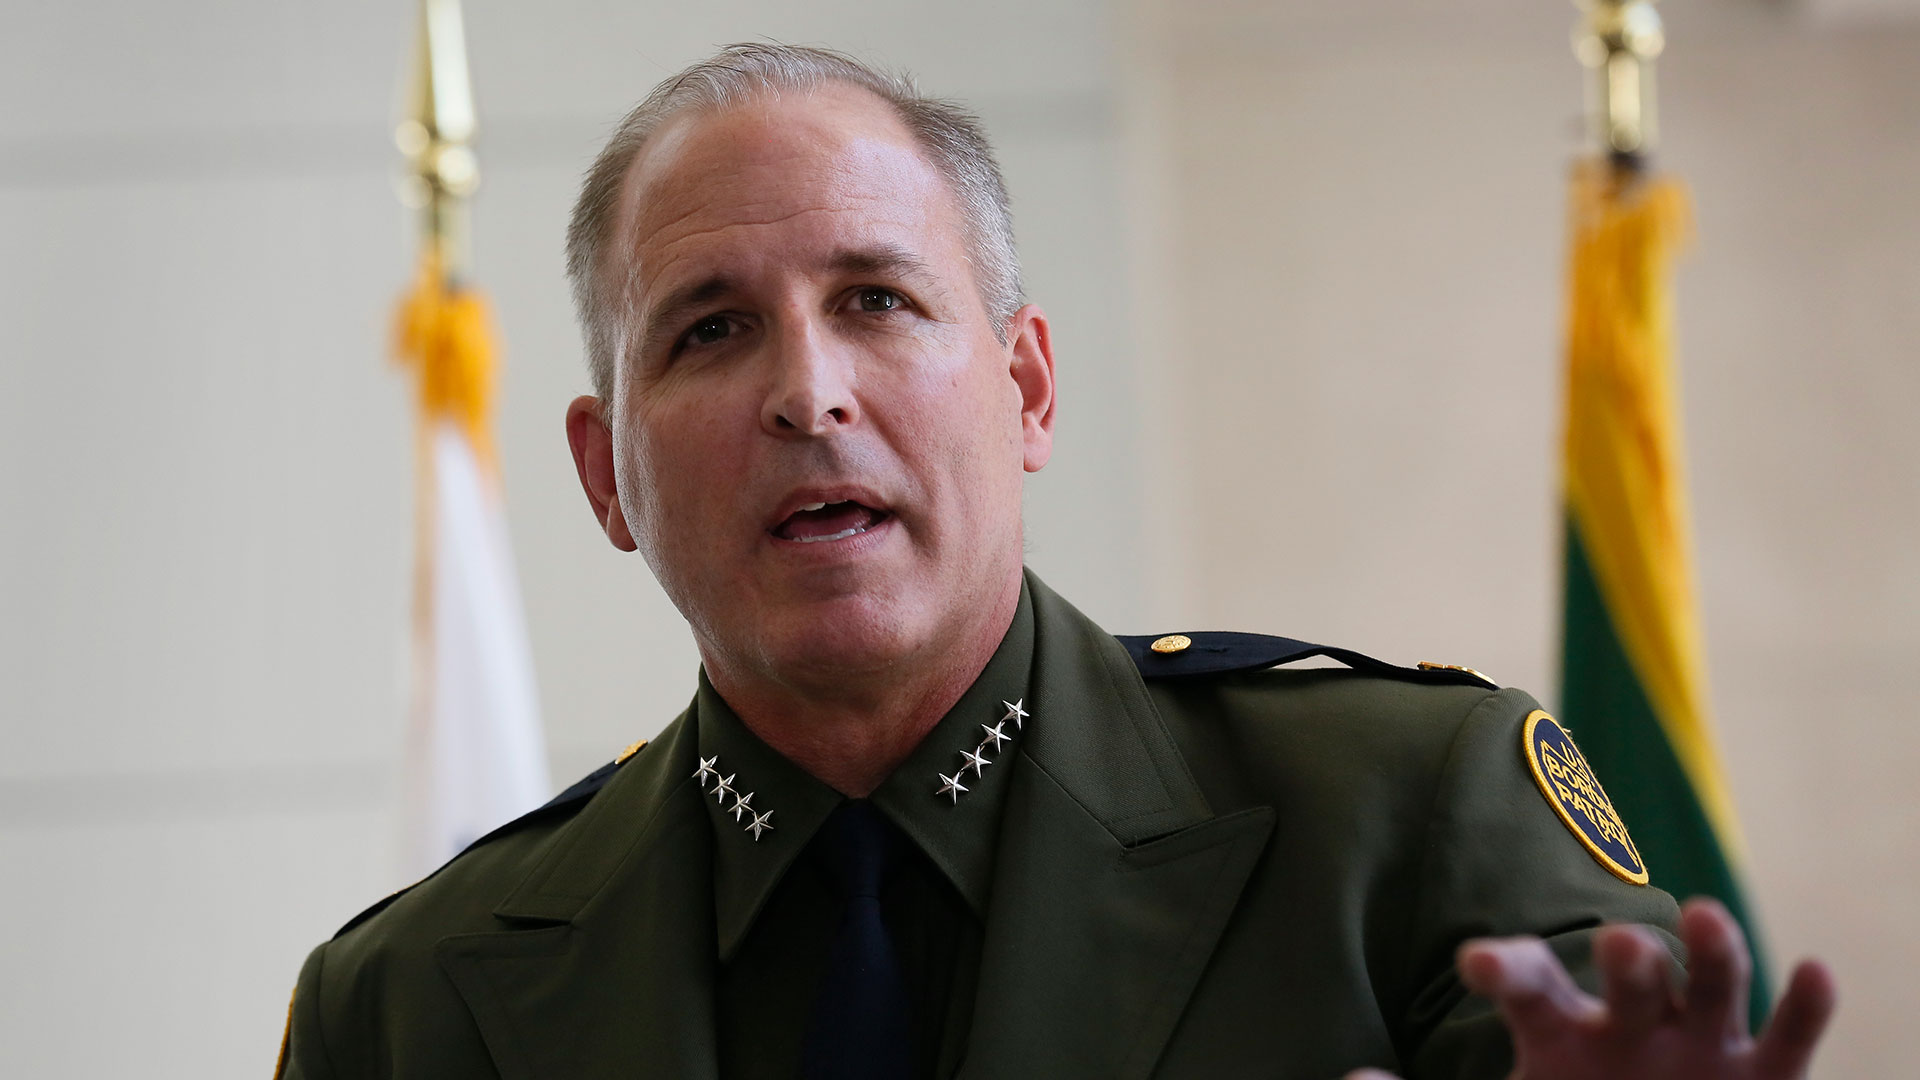 U.S. Customs and Border Protection Acting Commissioner Mark Morgan, in 2016.